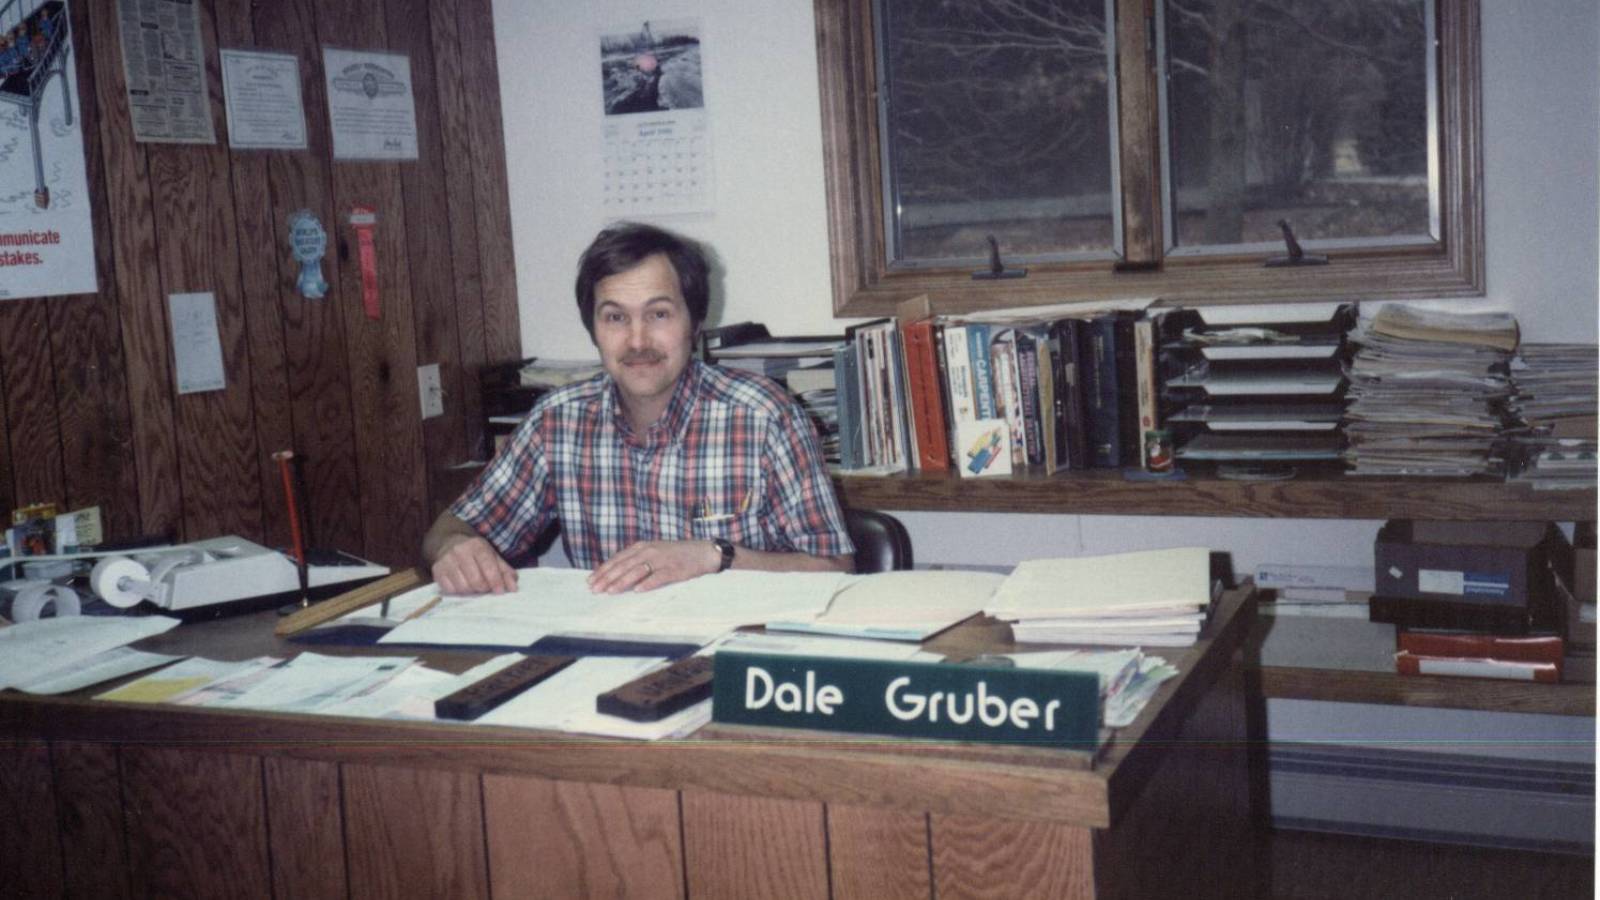 Dale Gruber’s Construction Career Story